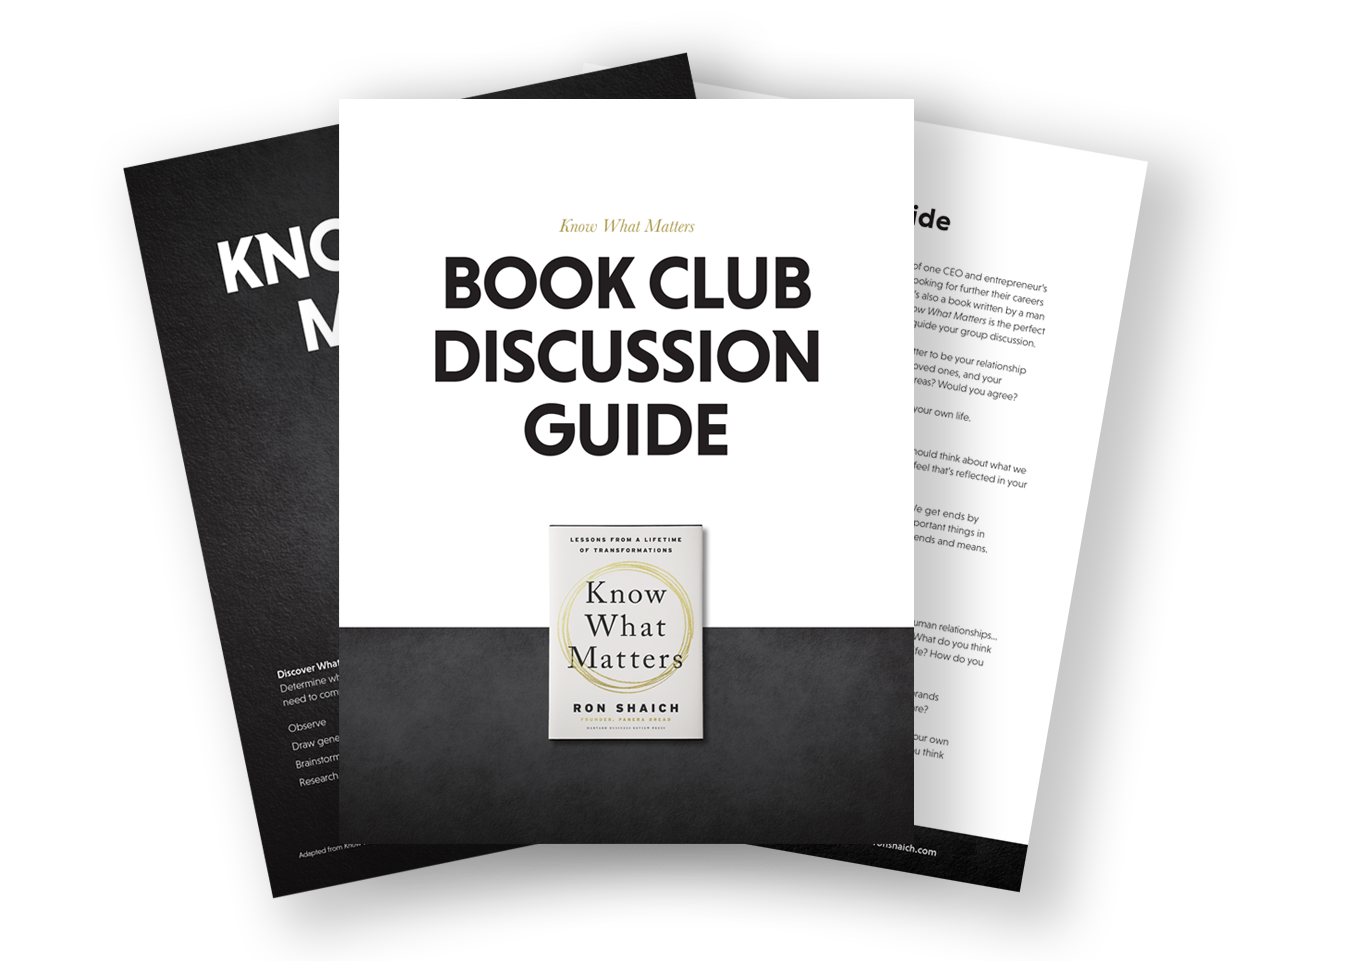 a book titled know what matters sits on top of a book club discussion guide